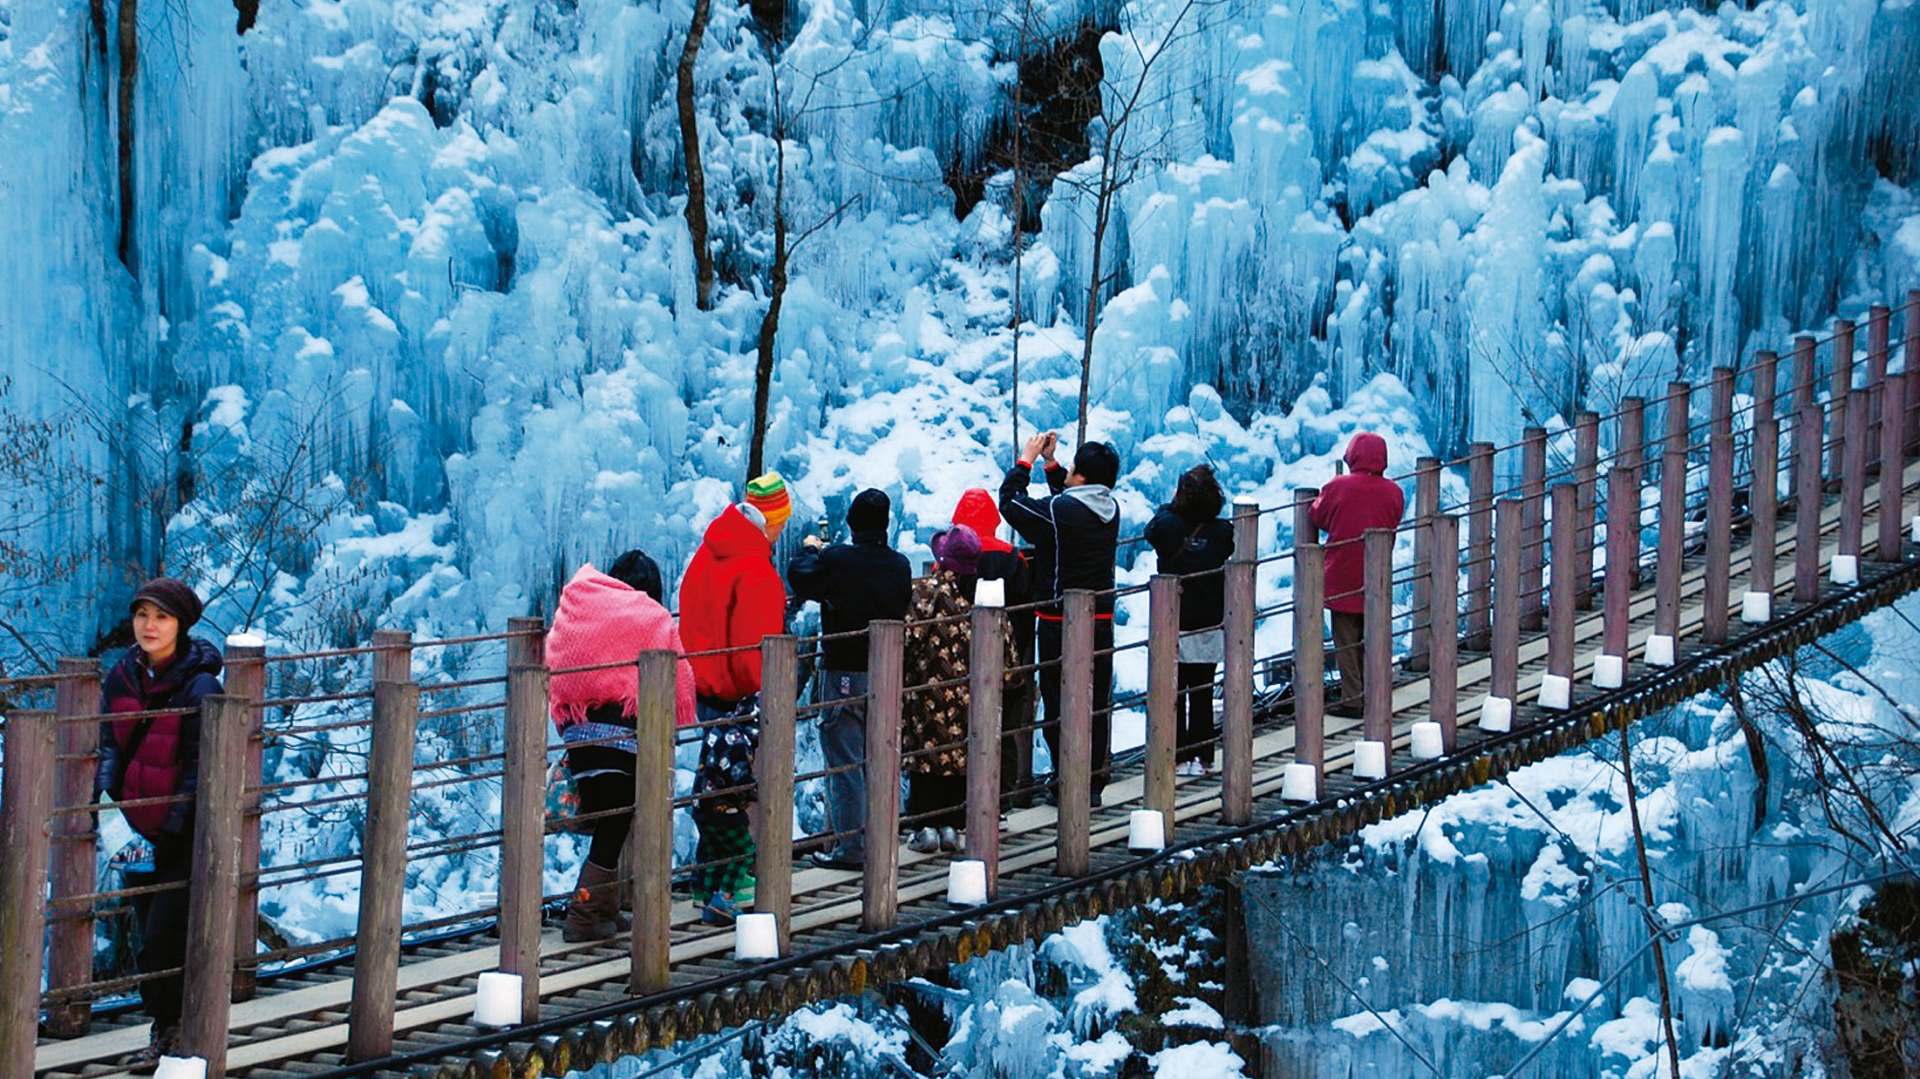 Onouchi Gorge - Must-See Trip Plans, Access, Hours & Price | GOOD LUCK TRIP